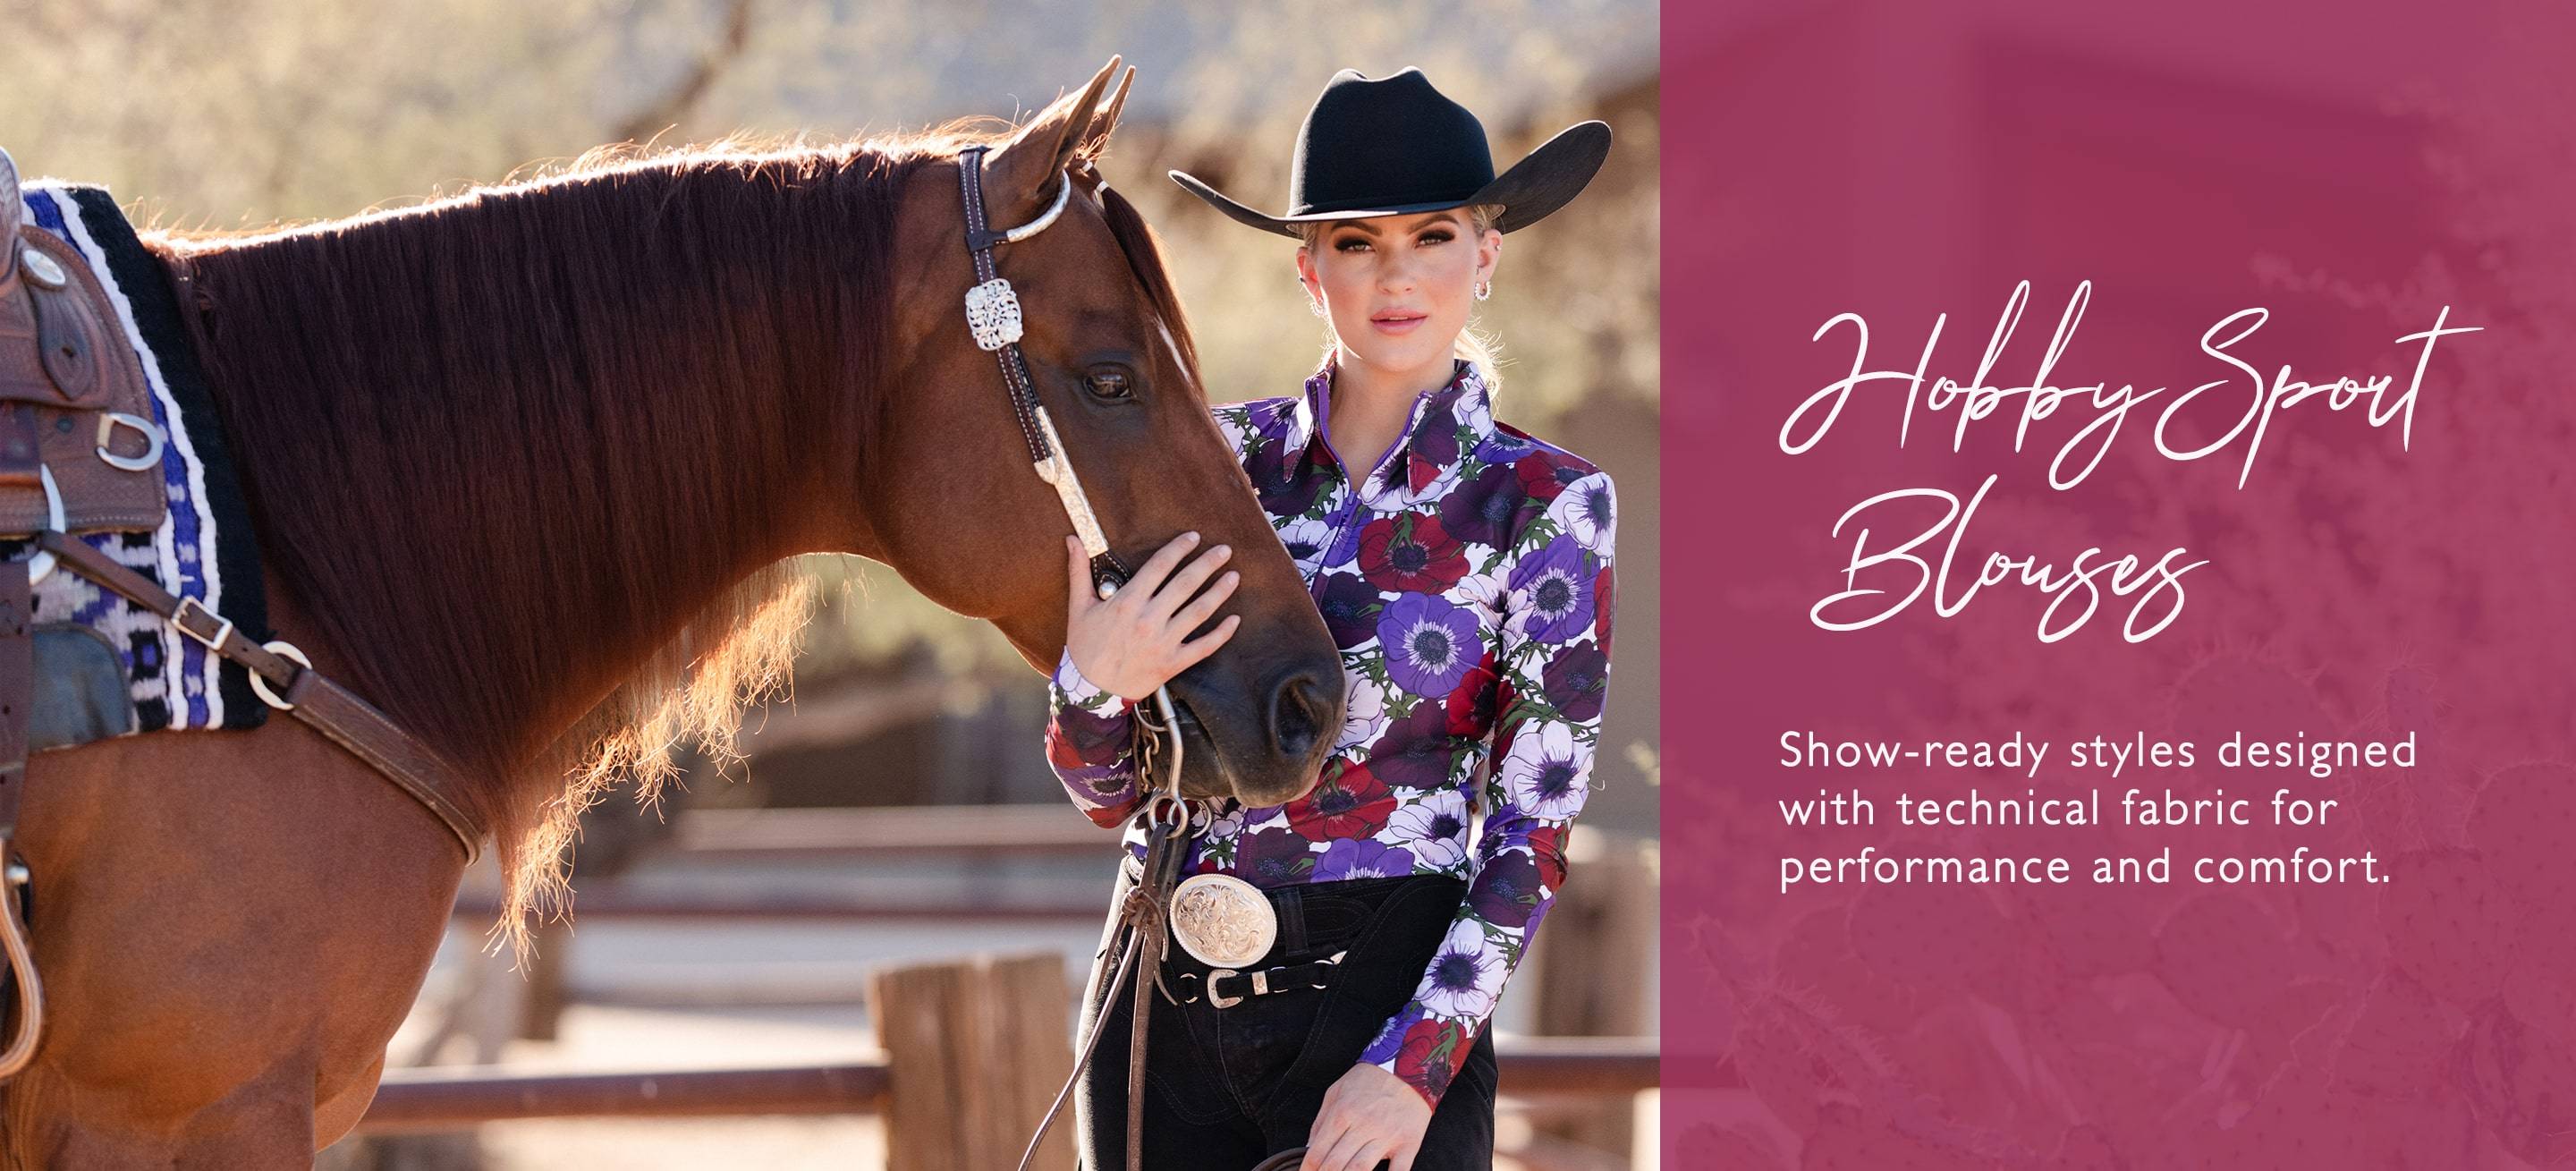 HobbySport Blouses, Show-Ready Styles designed with technical fabric for performance and comfort. 